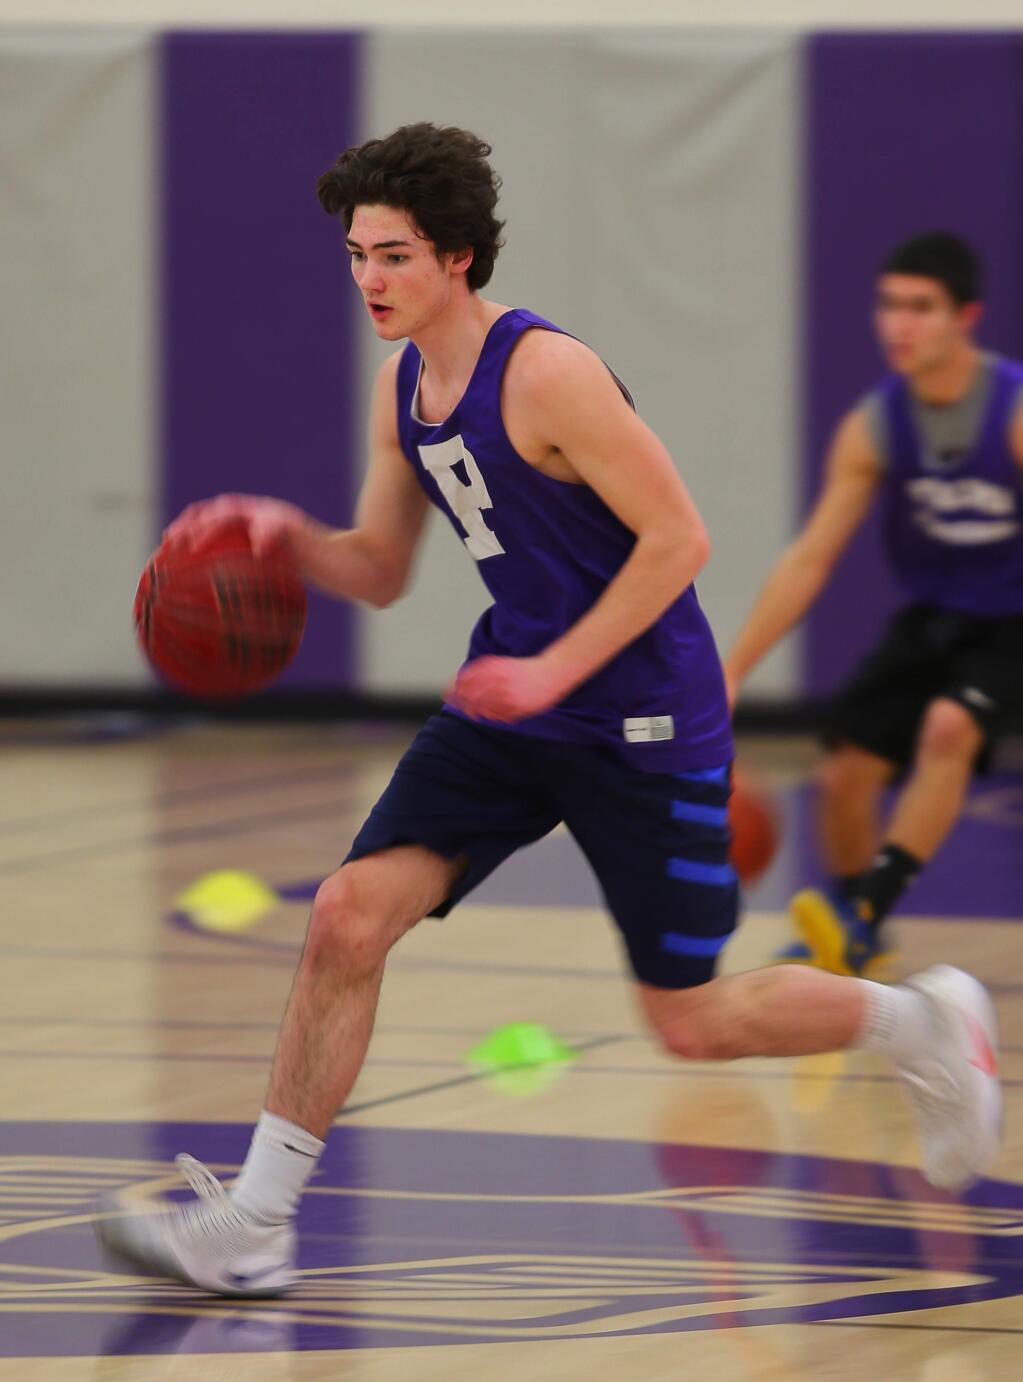 Petaluma's Brendan O'Neill dribbles the ball down the court during warmup drills on Friday, January 13, 2017. (Christopher Chung/ The Press Democrat)